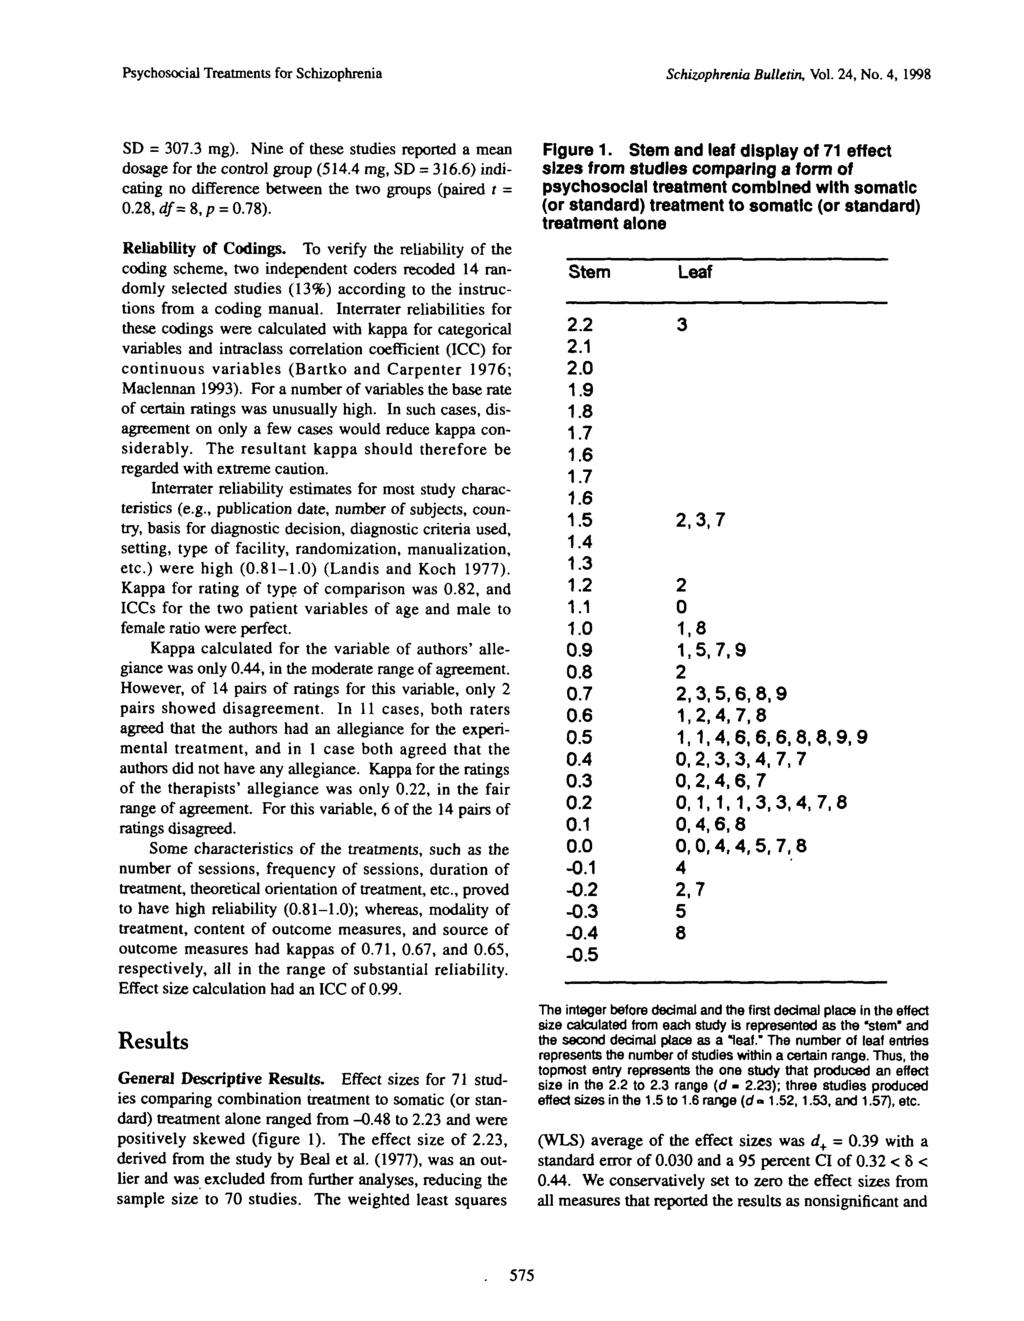 Psychosocial Treatments for Schizophrenia Schizophrenia Bulletin, Vol. 24, No. 4, 1998 SD = 307.3 mg). Nine of these studies reported a mean dosage for the control group (514.4 mg, SD = 316.